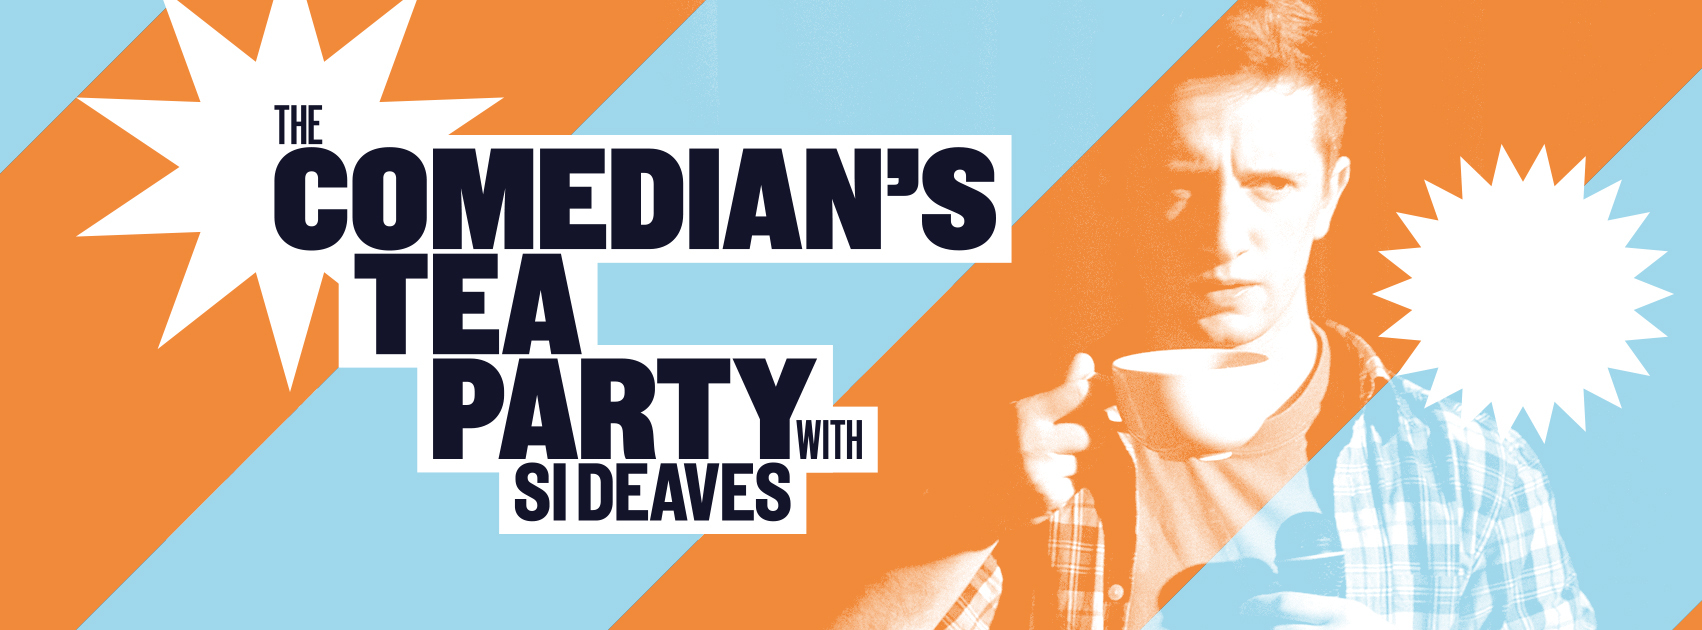 The Comedian’s Tea Party with Si Deaves